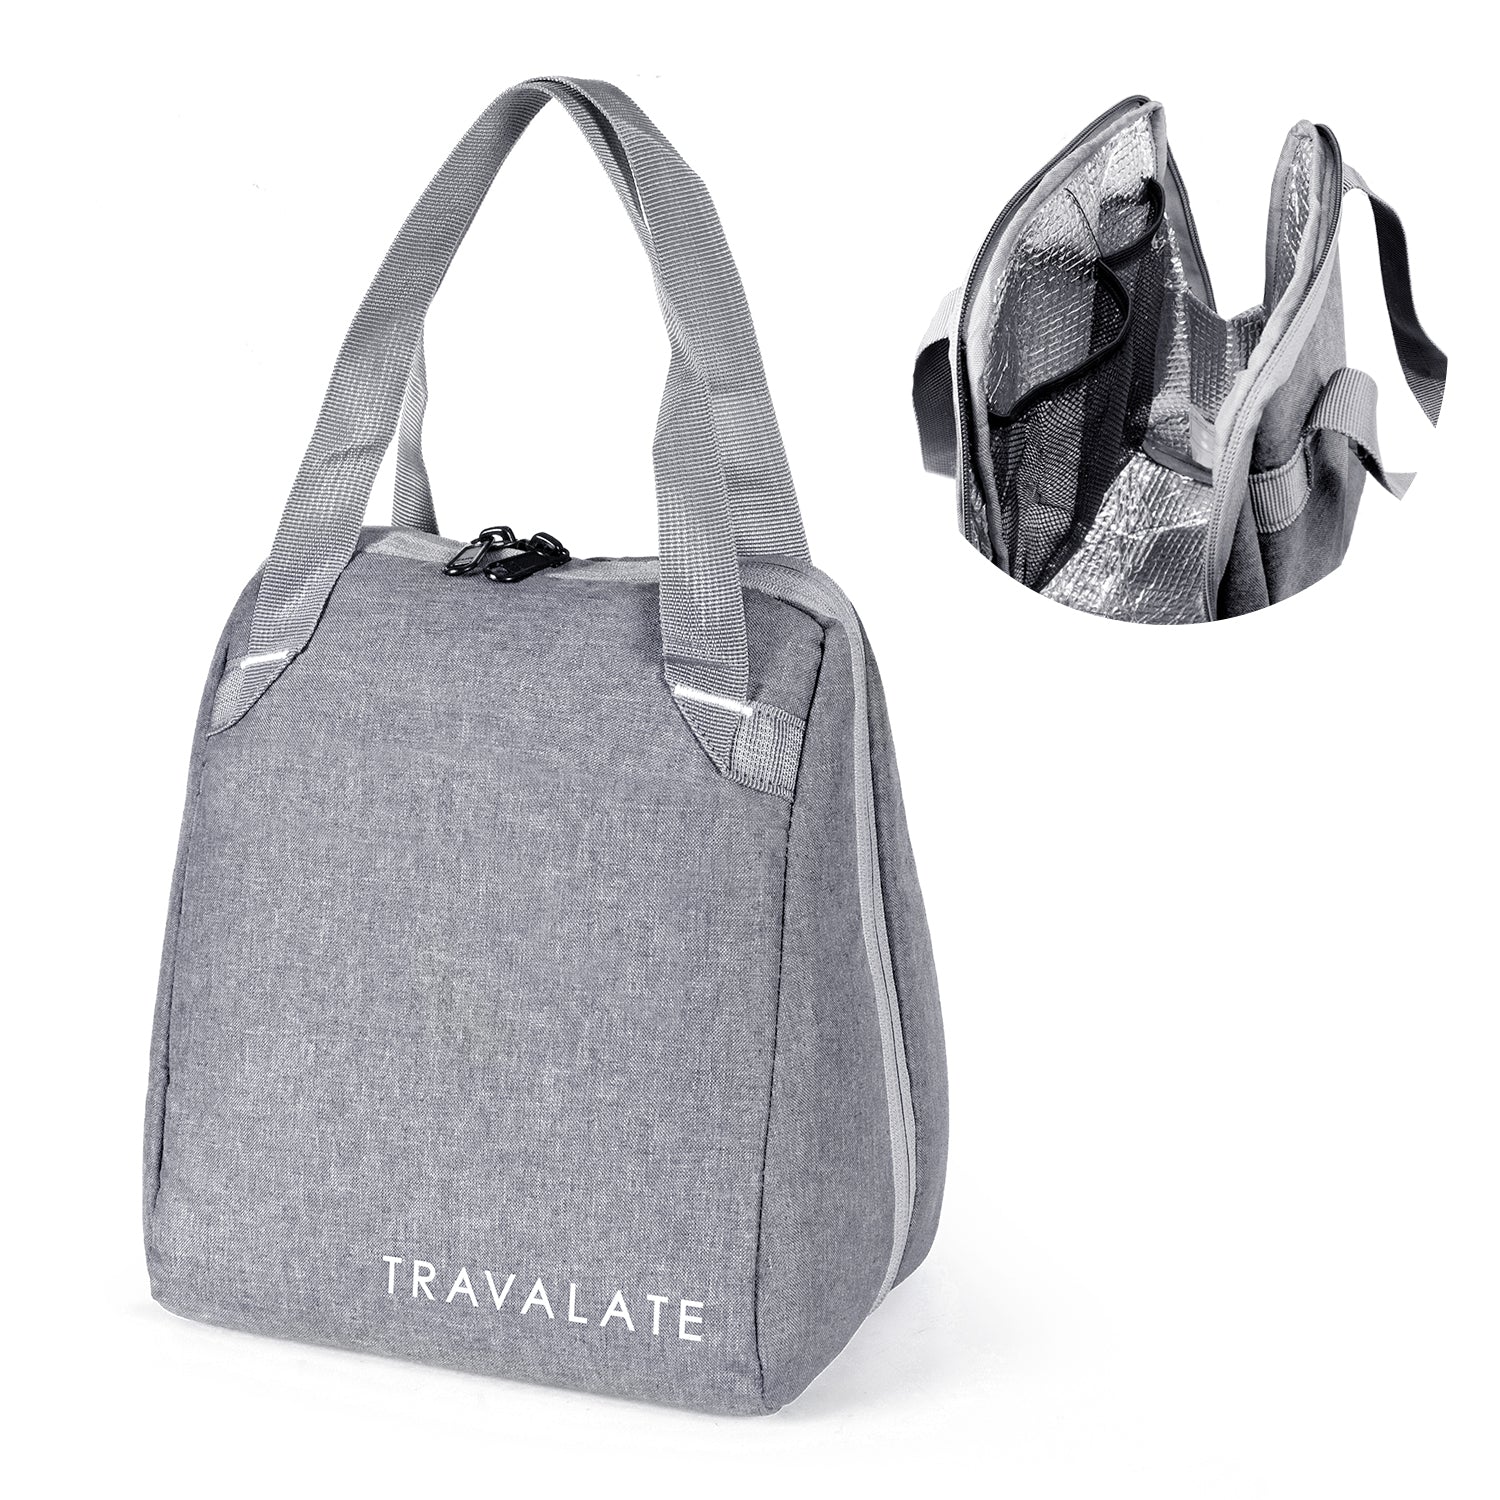 Thermally Insulated Lunch Bag | Grey